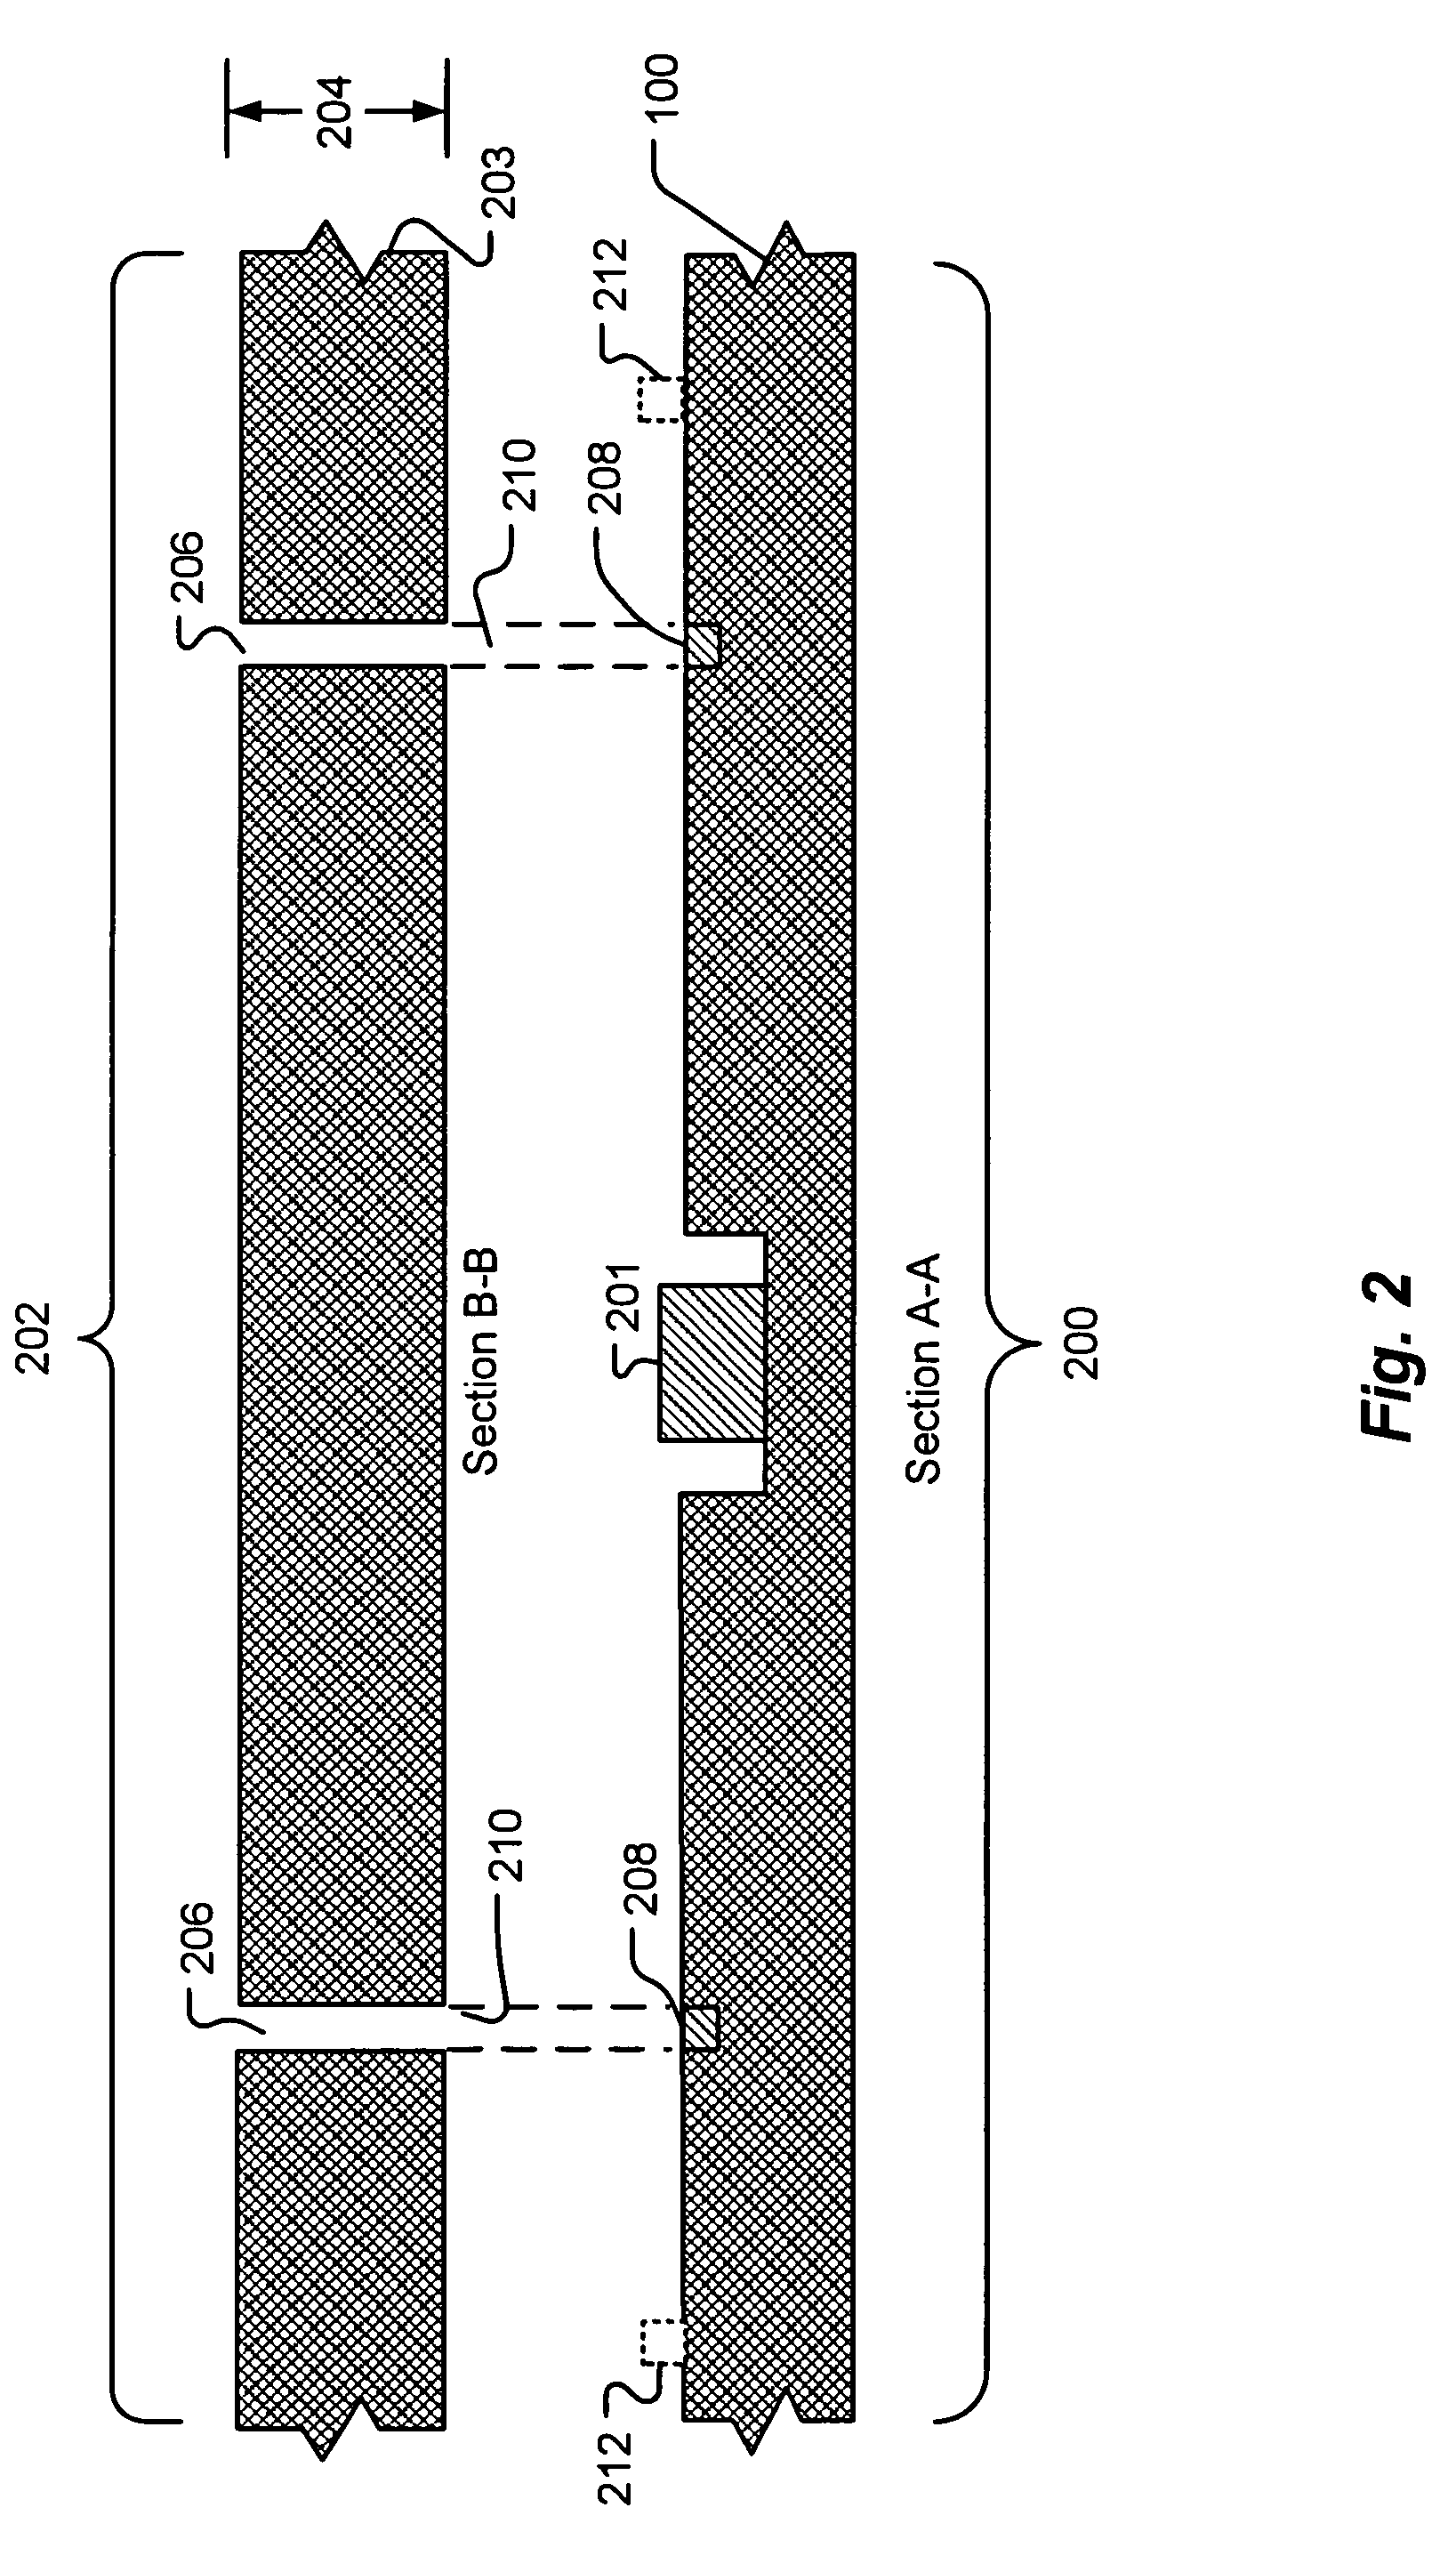 Chip-scale package for integrated circuits